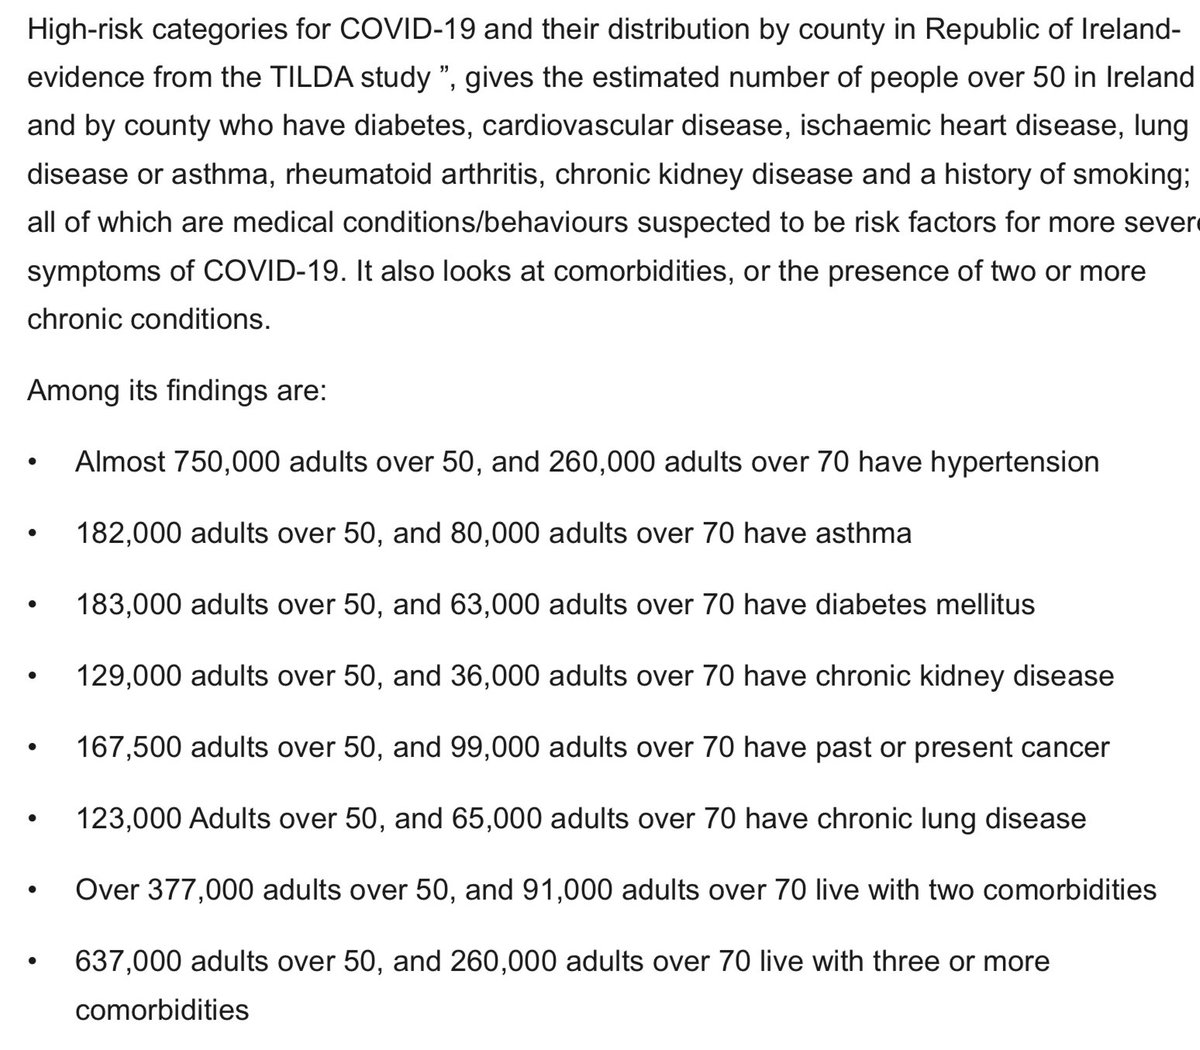 So when someone tries to convince you that  #Covid19 deaths somehow don't count if the person had an underlying conditions here is just how many people over the age of 50 in Ireland that they are telling you don't really matter Data from.  https://tilda.tcd.ie/publications/reports/pdf/Report_Covid19Multimorbidity.pdf #CovidIreland